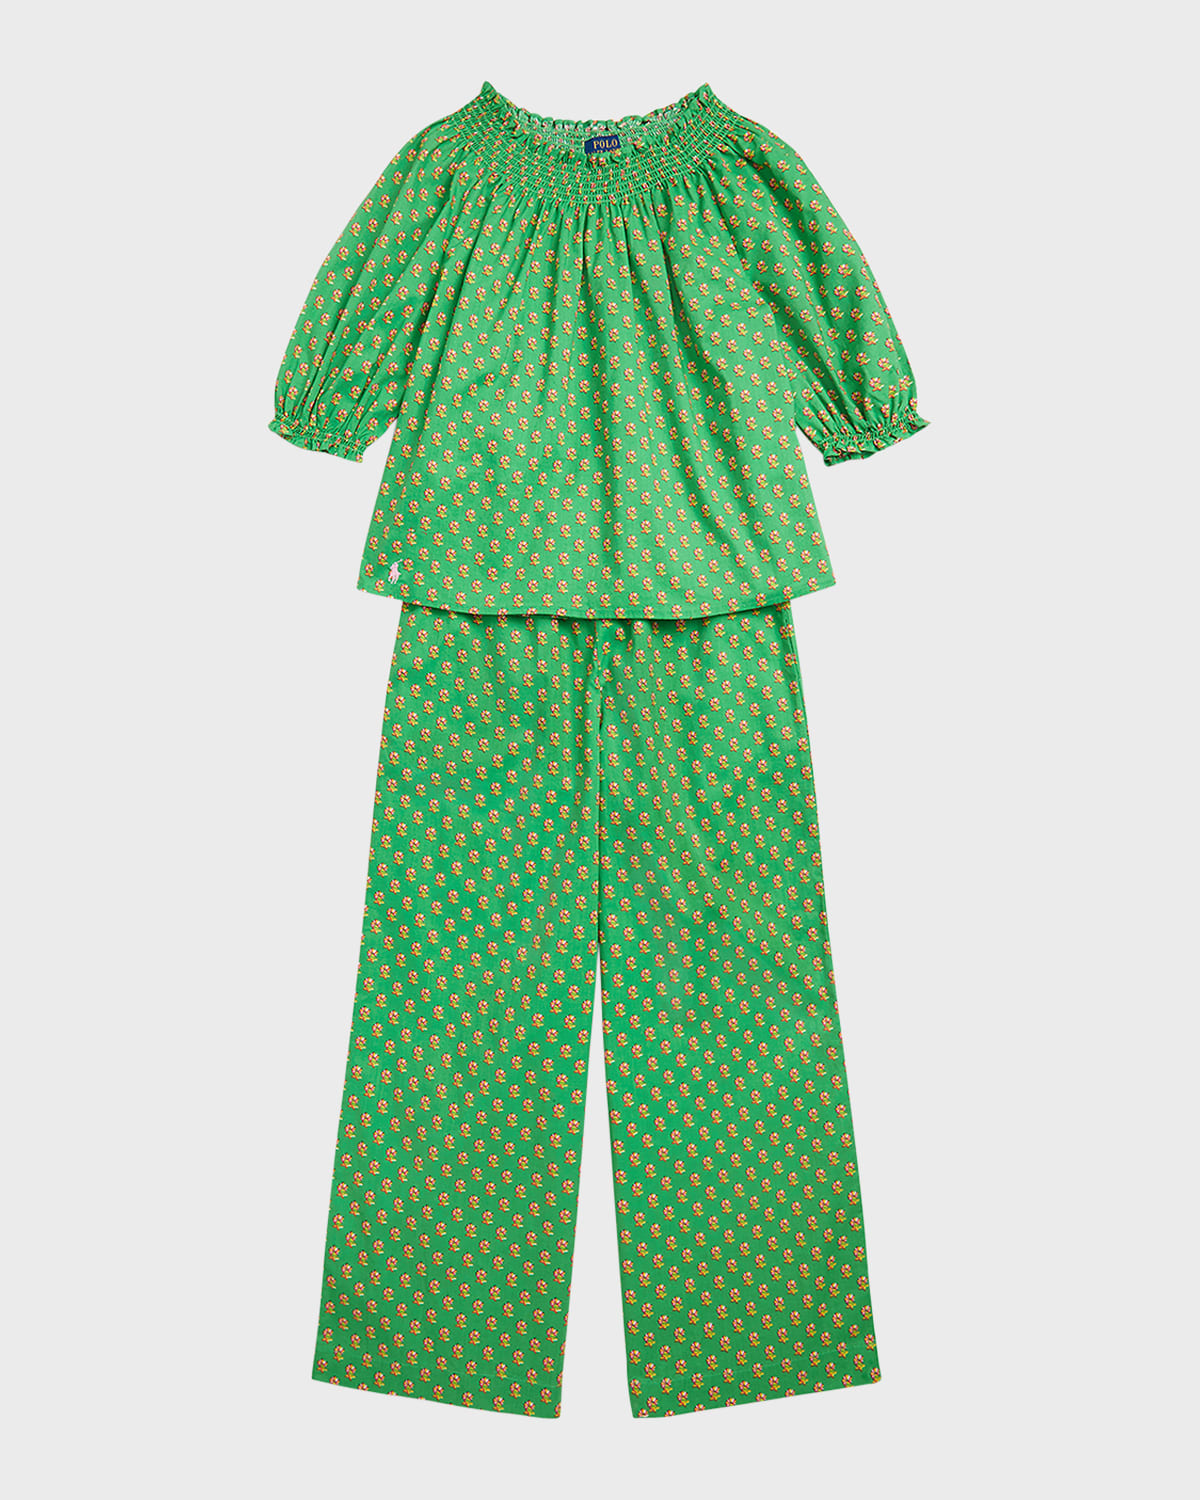 Ralph Lauren Kids' Girl's Floral Smocked Cotton Top And Pant Set In Preppy Woodblock